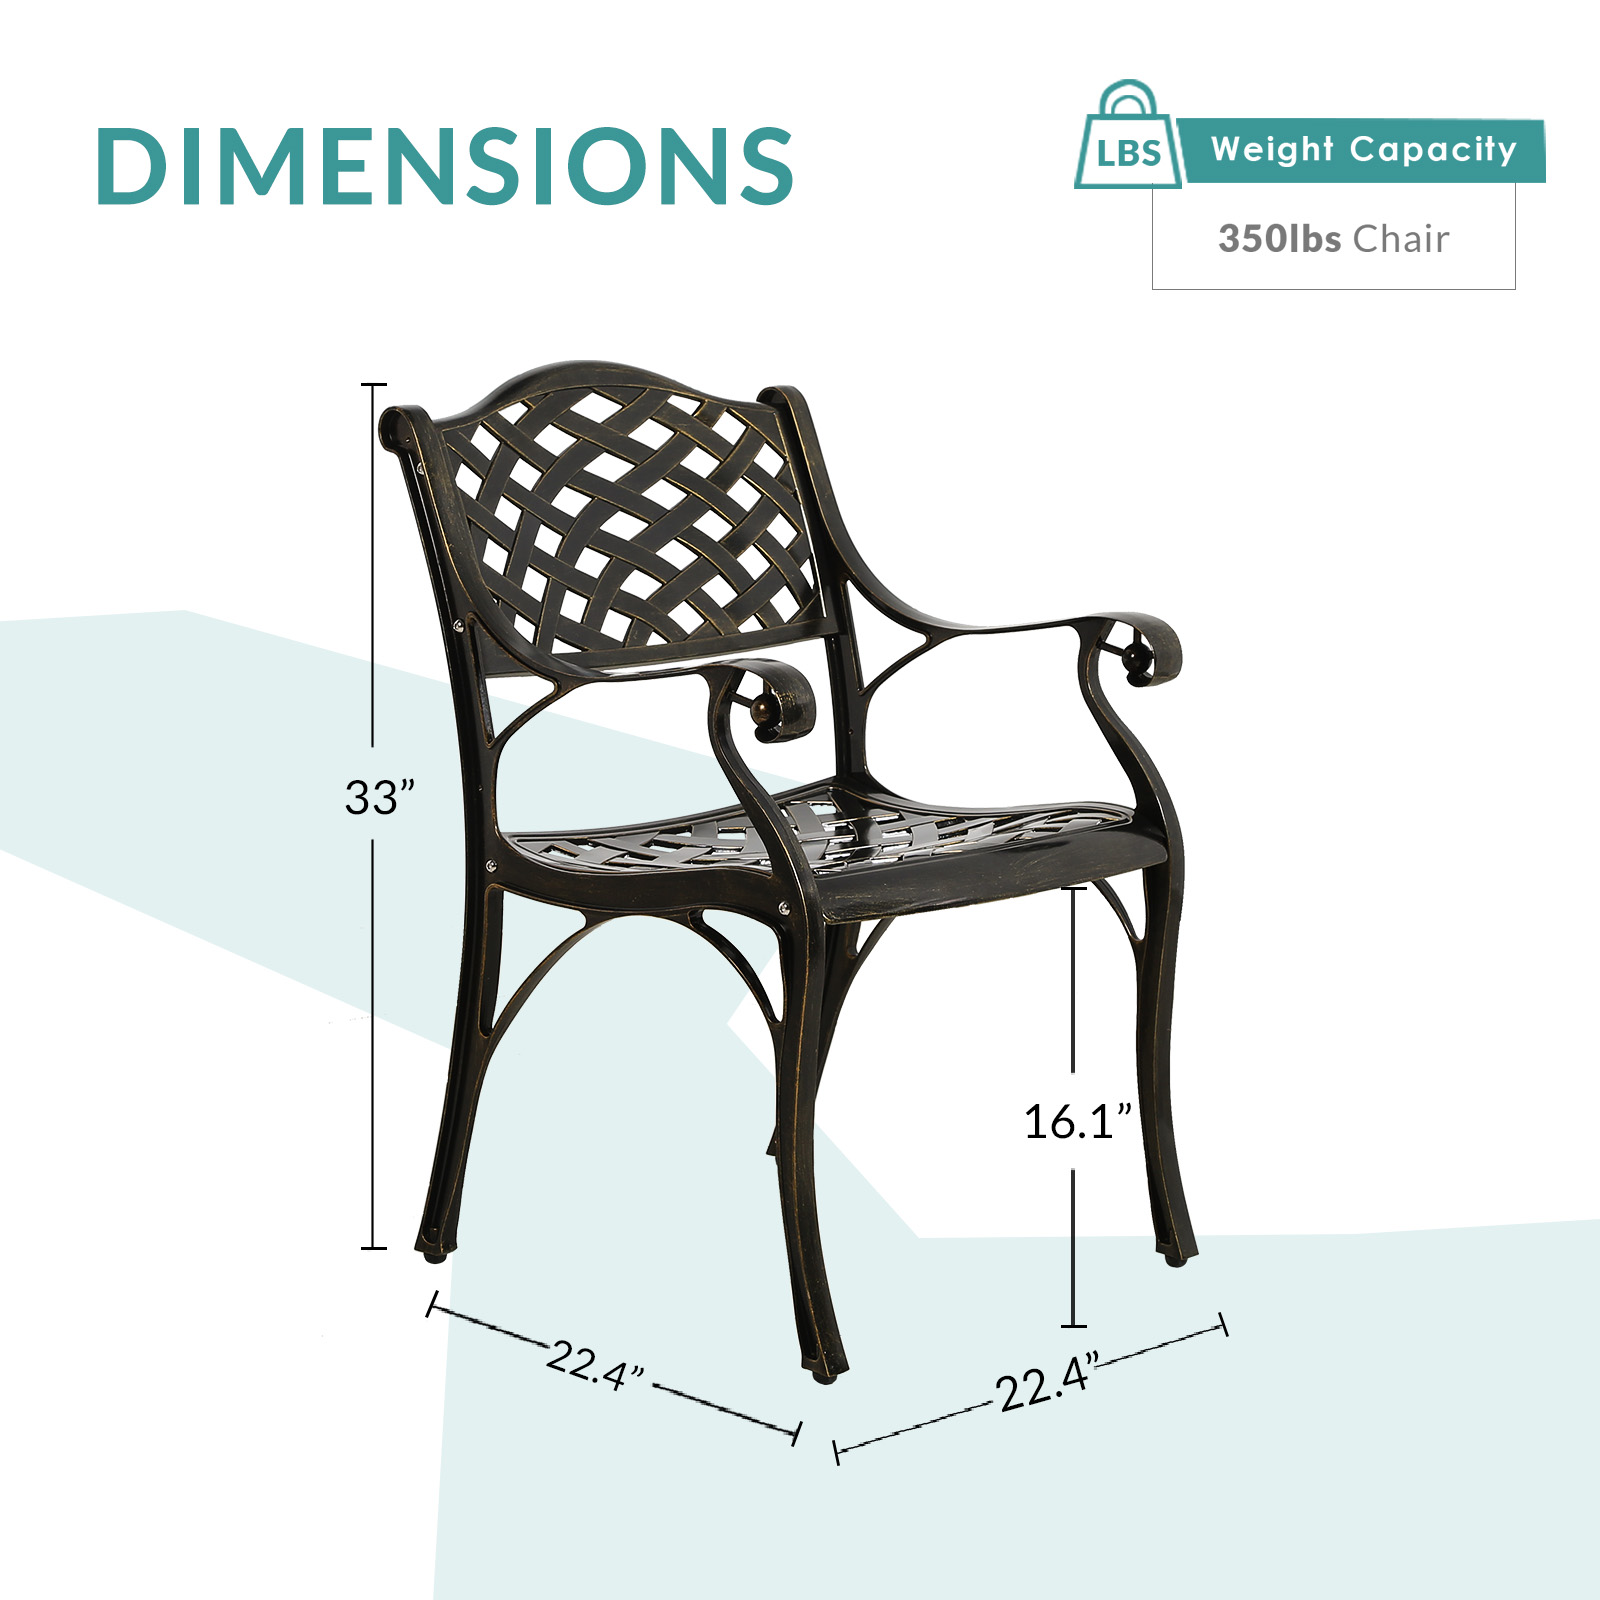 MEETWARM 2 Piece Patio Dining Chairs, Outdoor All-Weather Cast Aluminum Chairs, Patio Bistro Dining Chair Set of 2 for Garden Deck Backyard, Lattice Weave Design - image 4 of 7